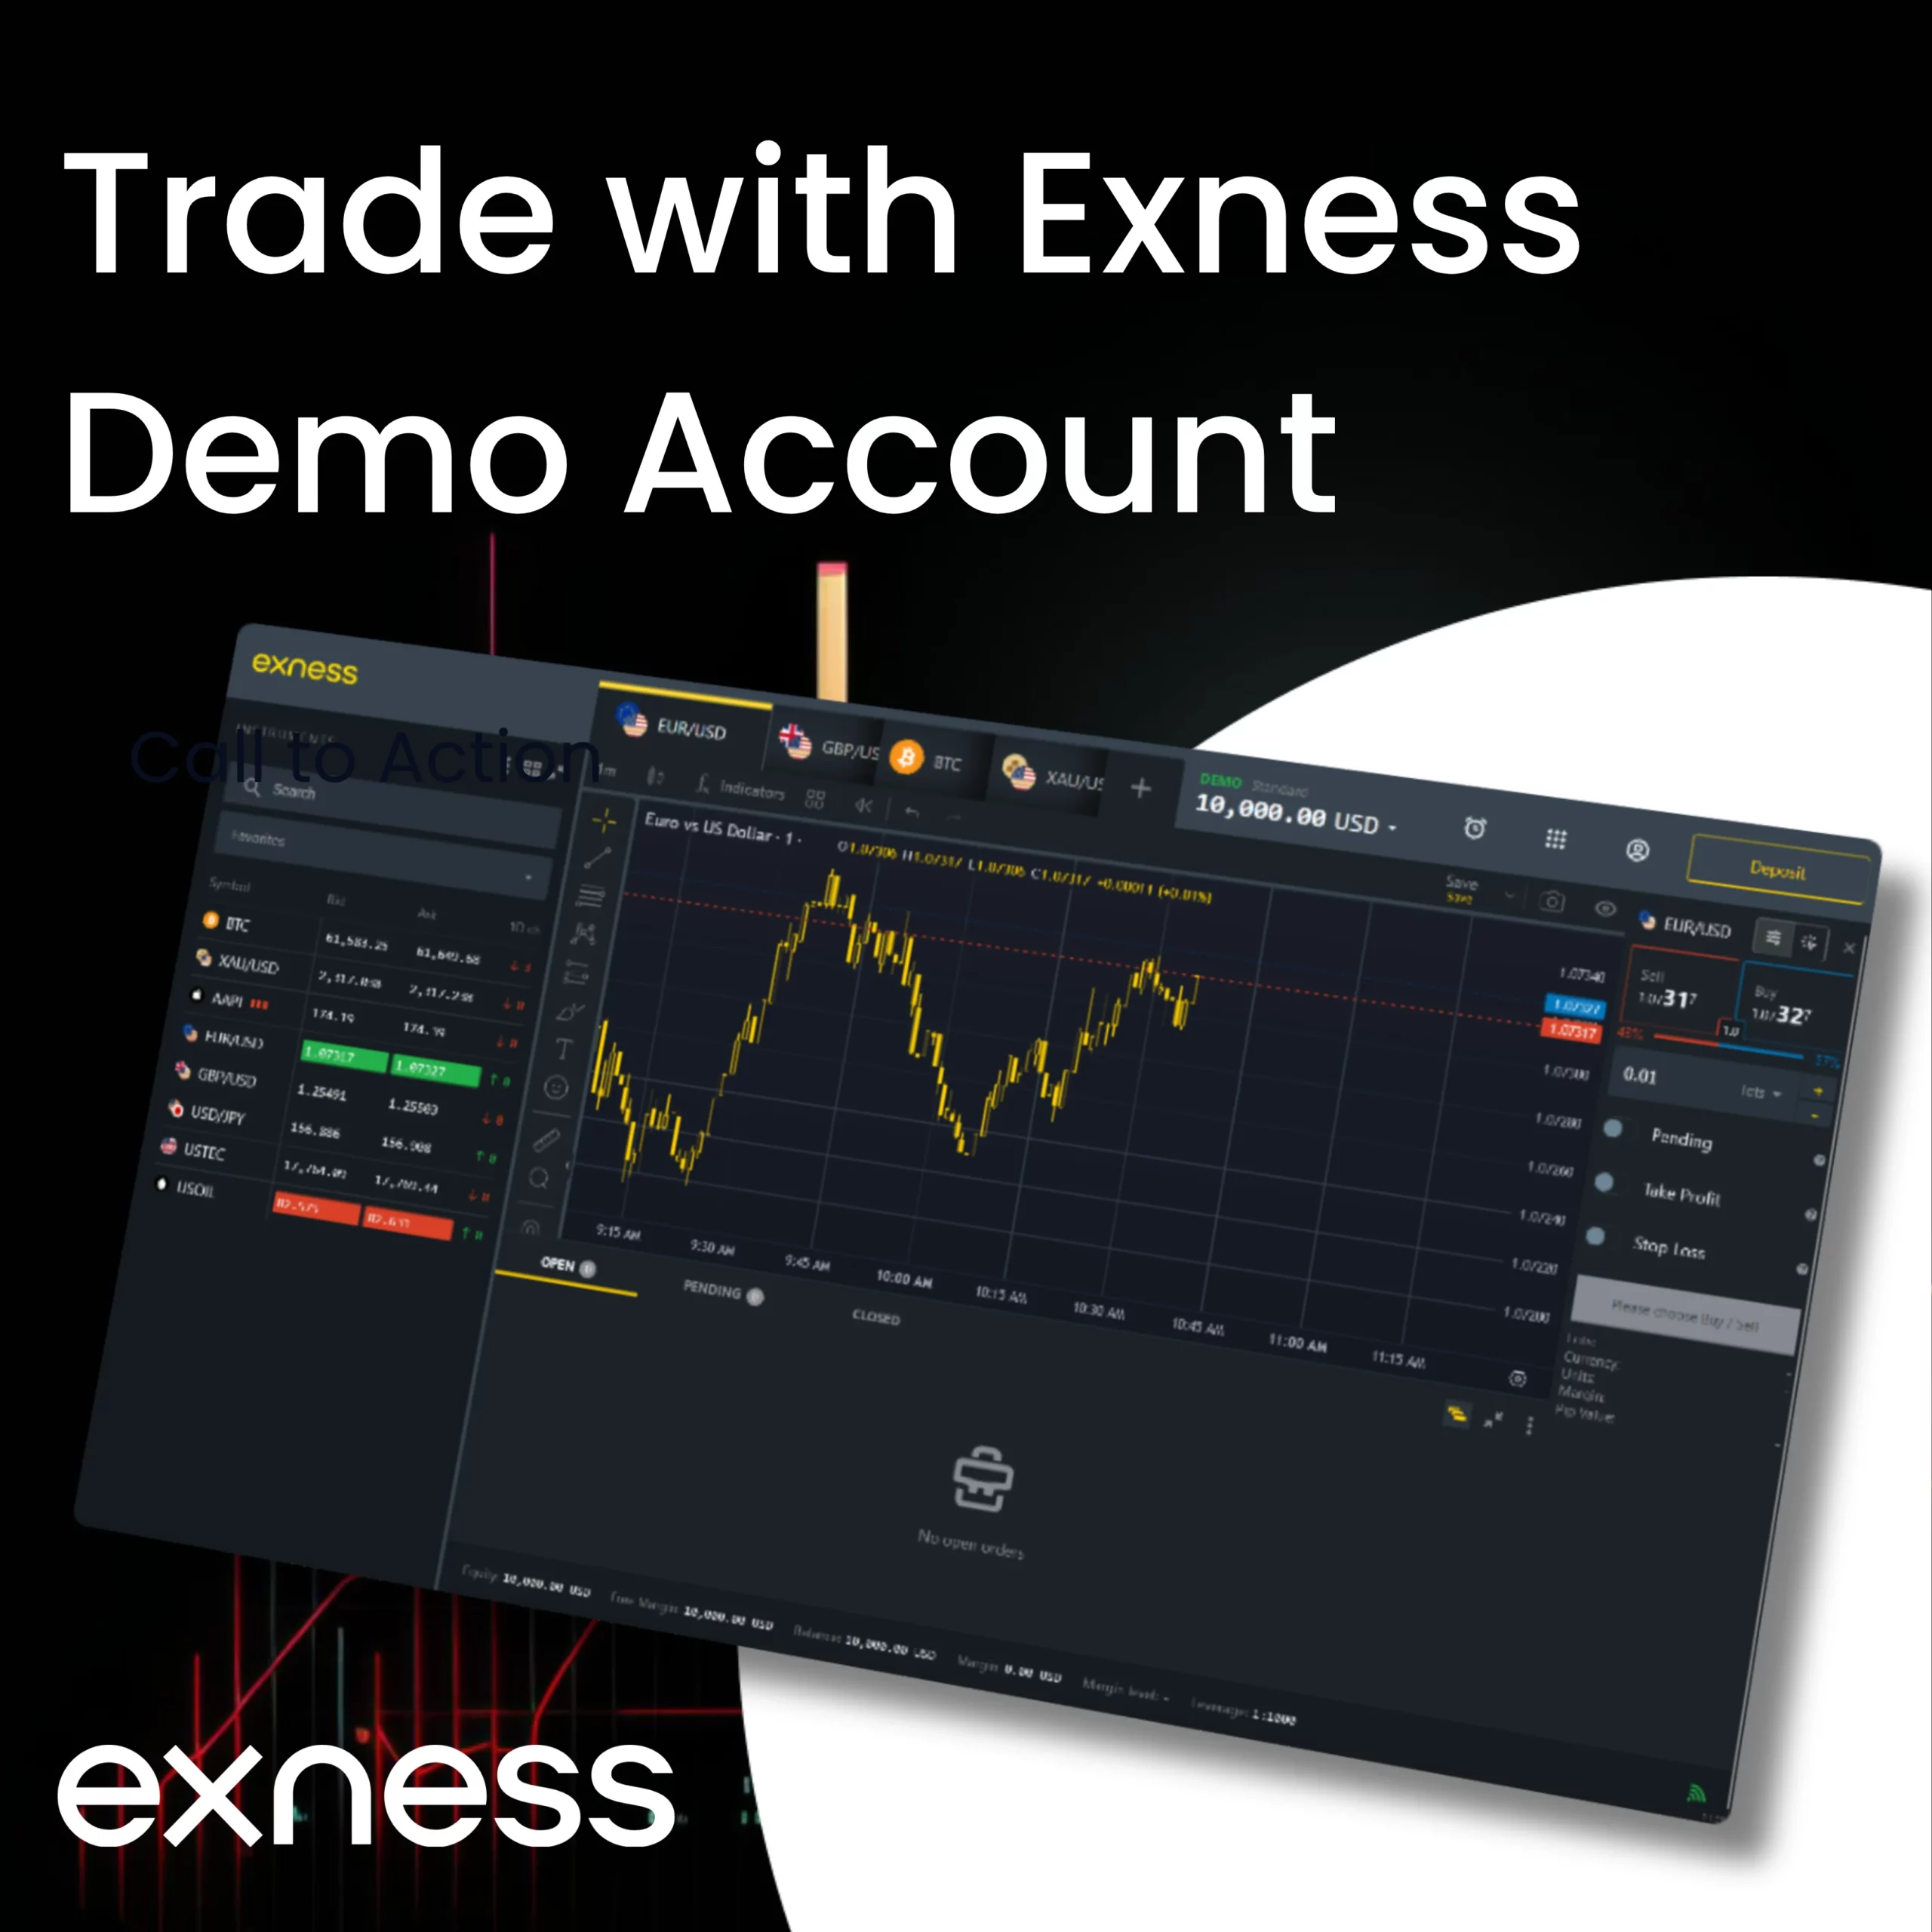 Exness Demo Account for Forex Trading.